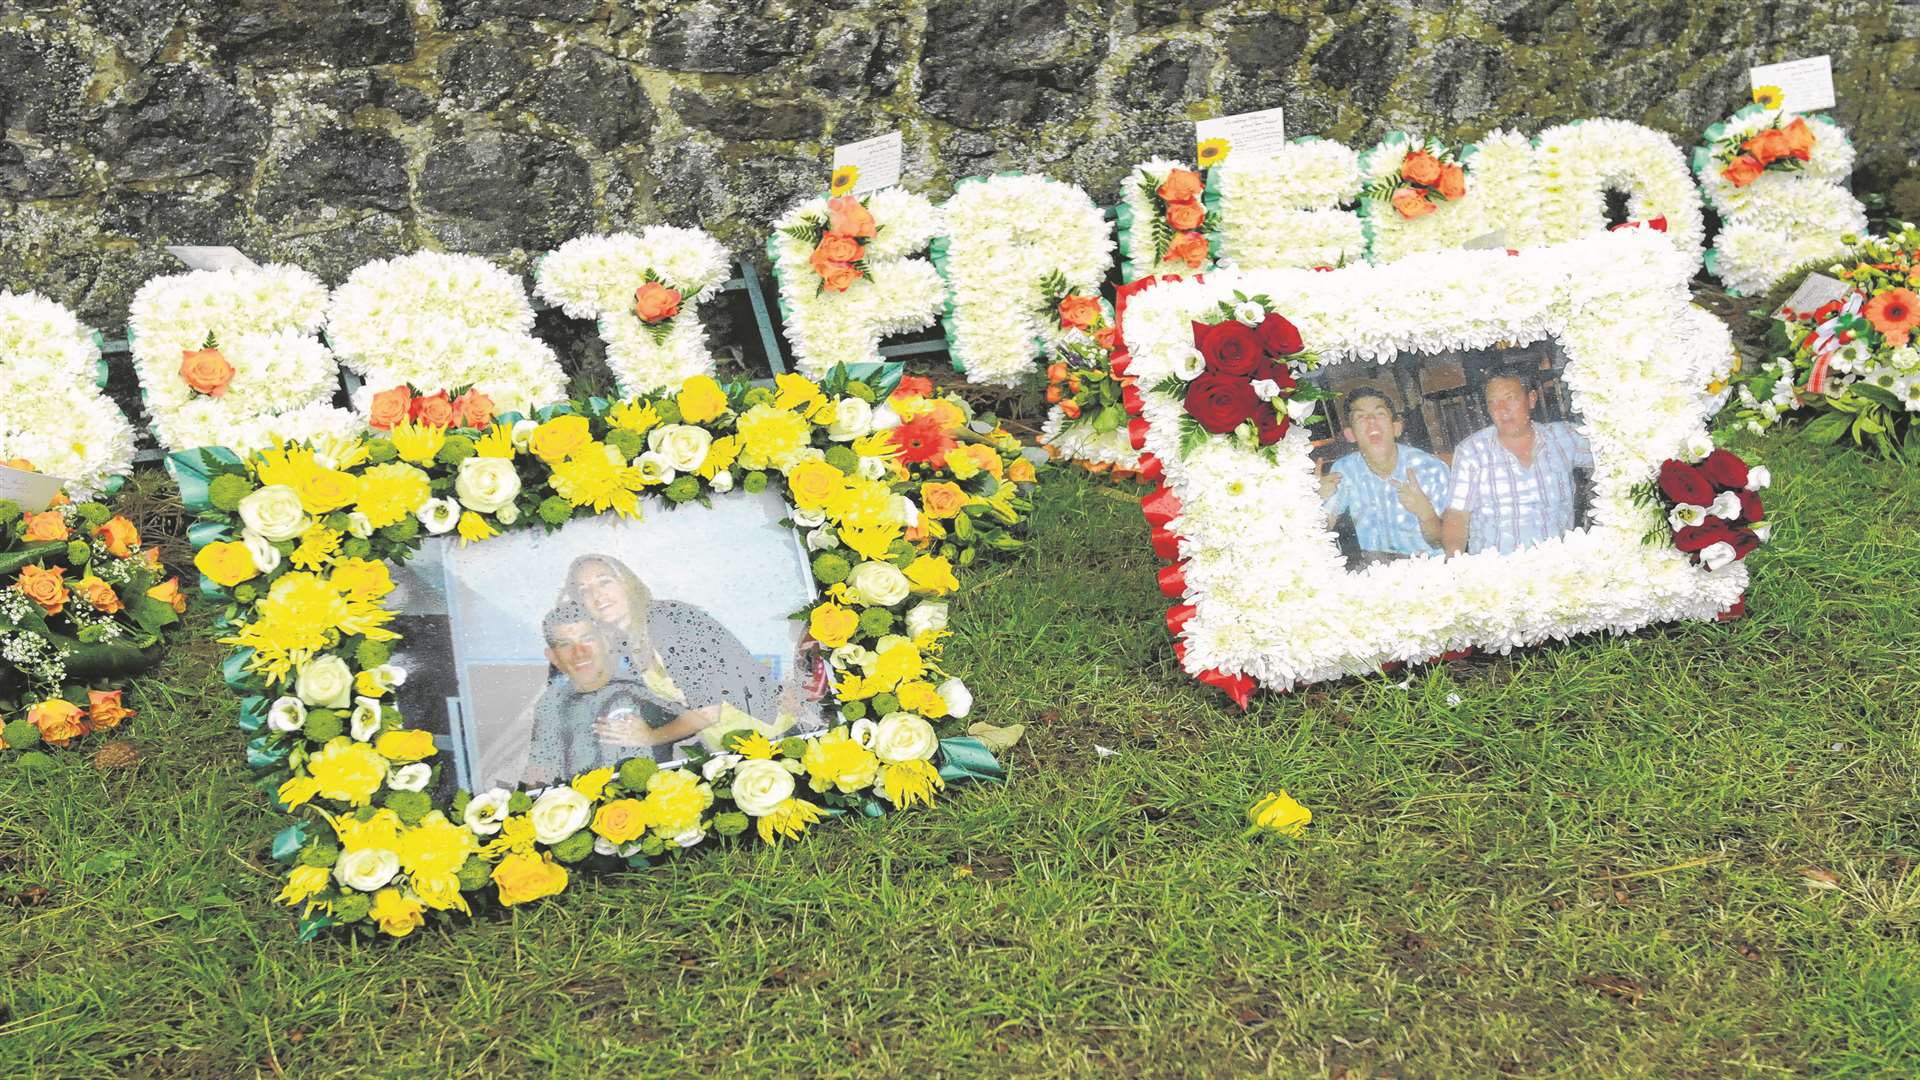 Flowers and photographs were among the tributes